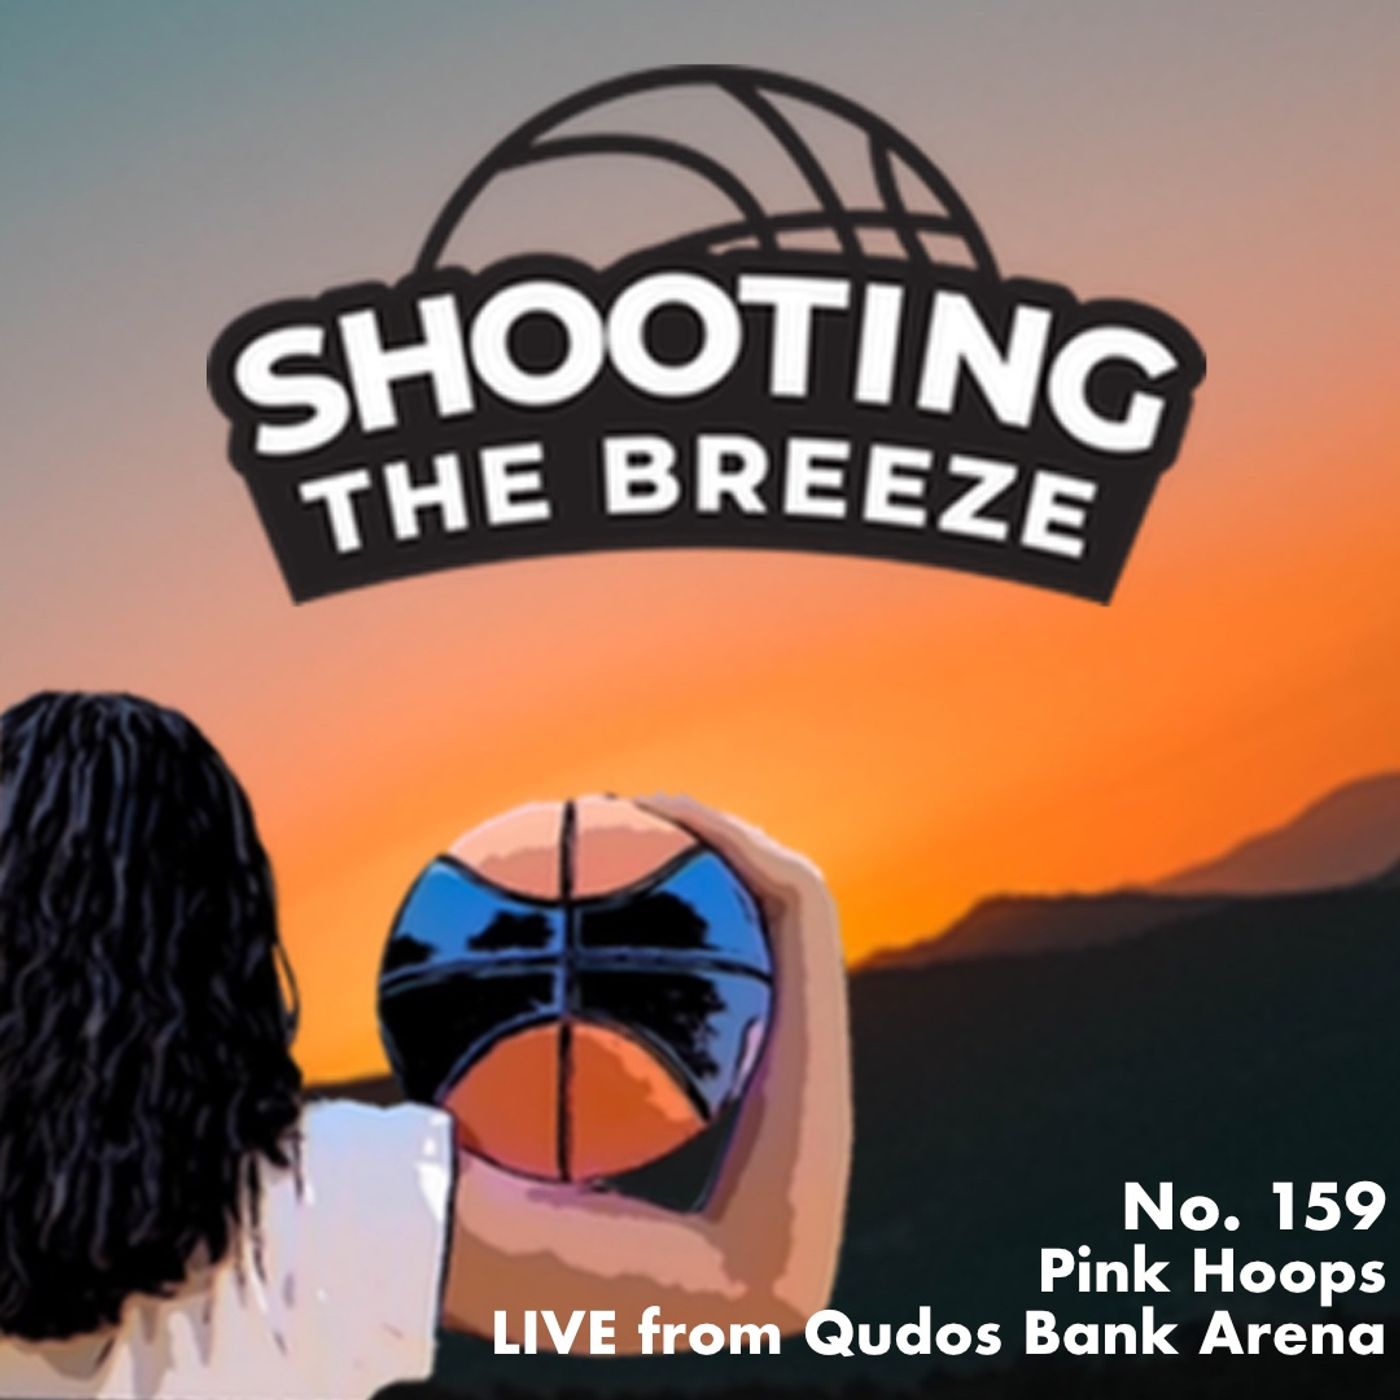 No. 159: Pink Hoops LIVE from Qudos Bank Arena